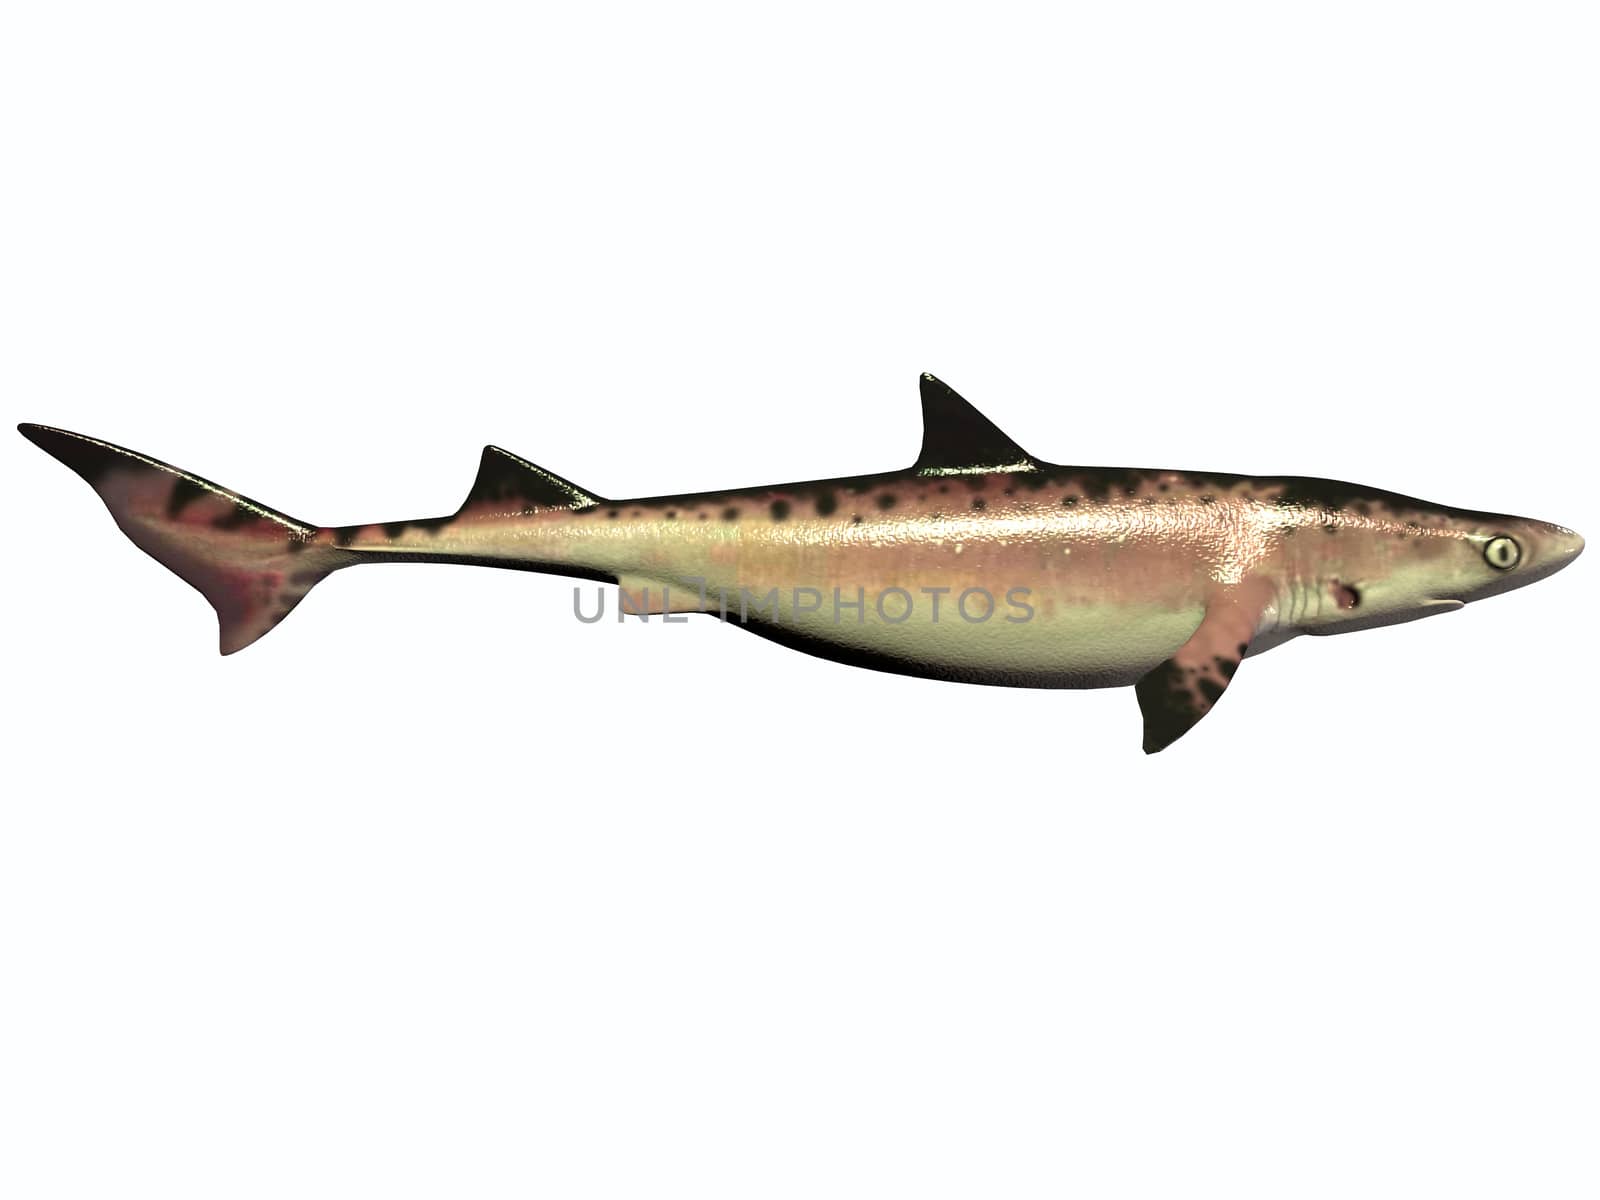 There were numerous species of shark during the Cretaceous Period of Earth's history which are now extinct.